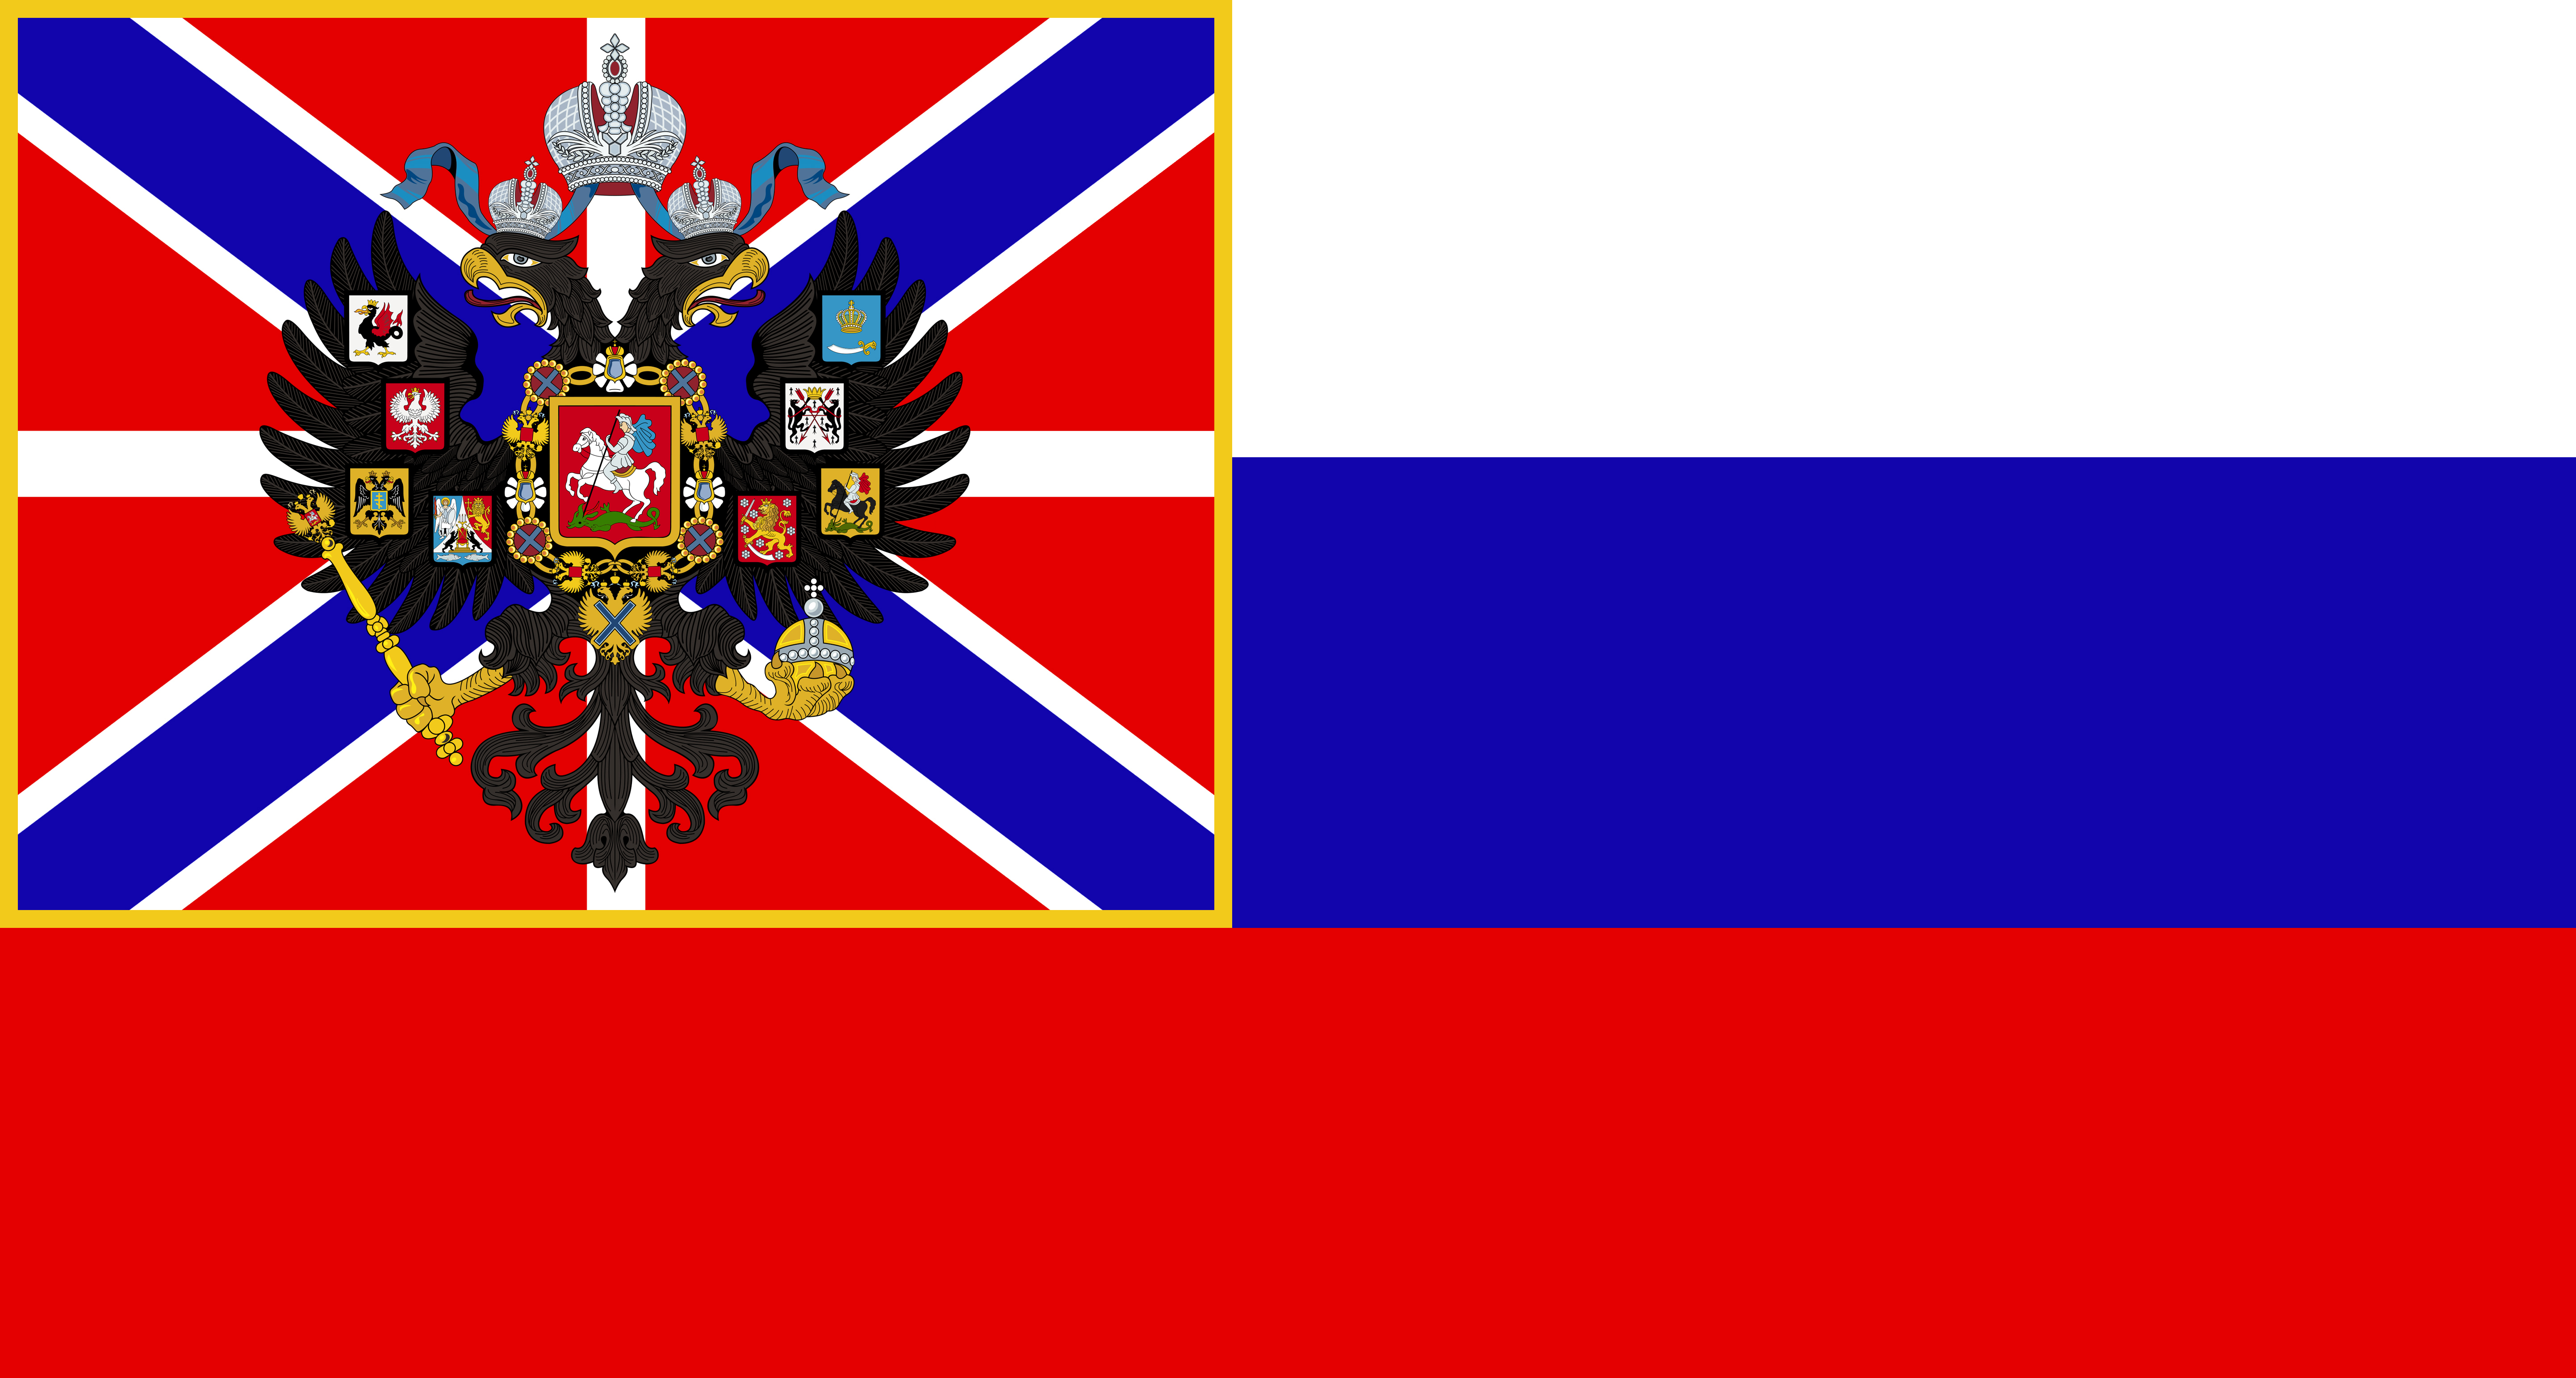 Rippled Flag Russia 1991-93 by History-Explorer on DeviantArt